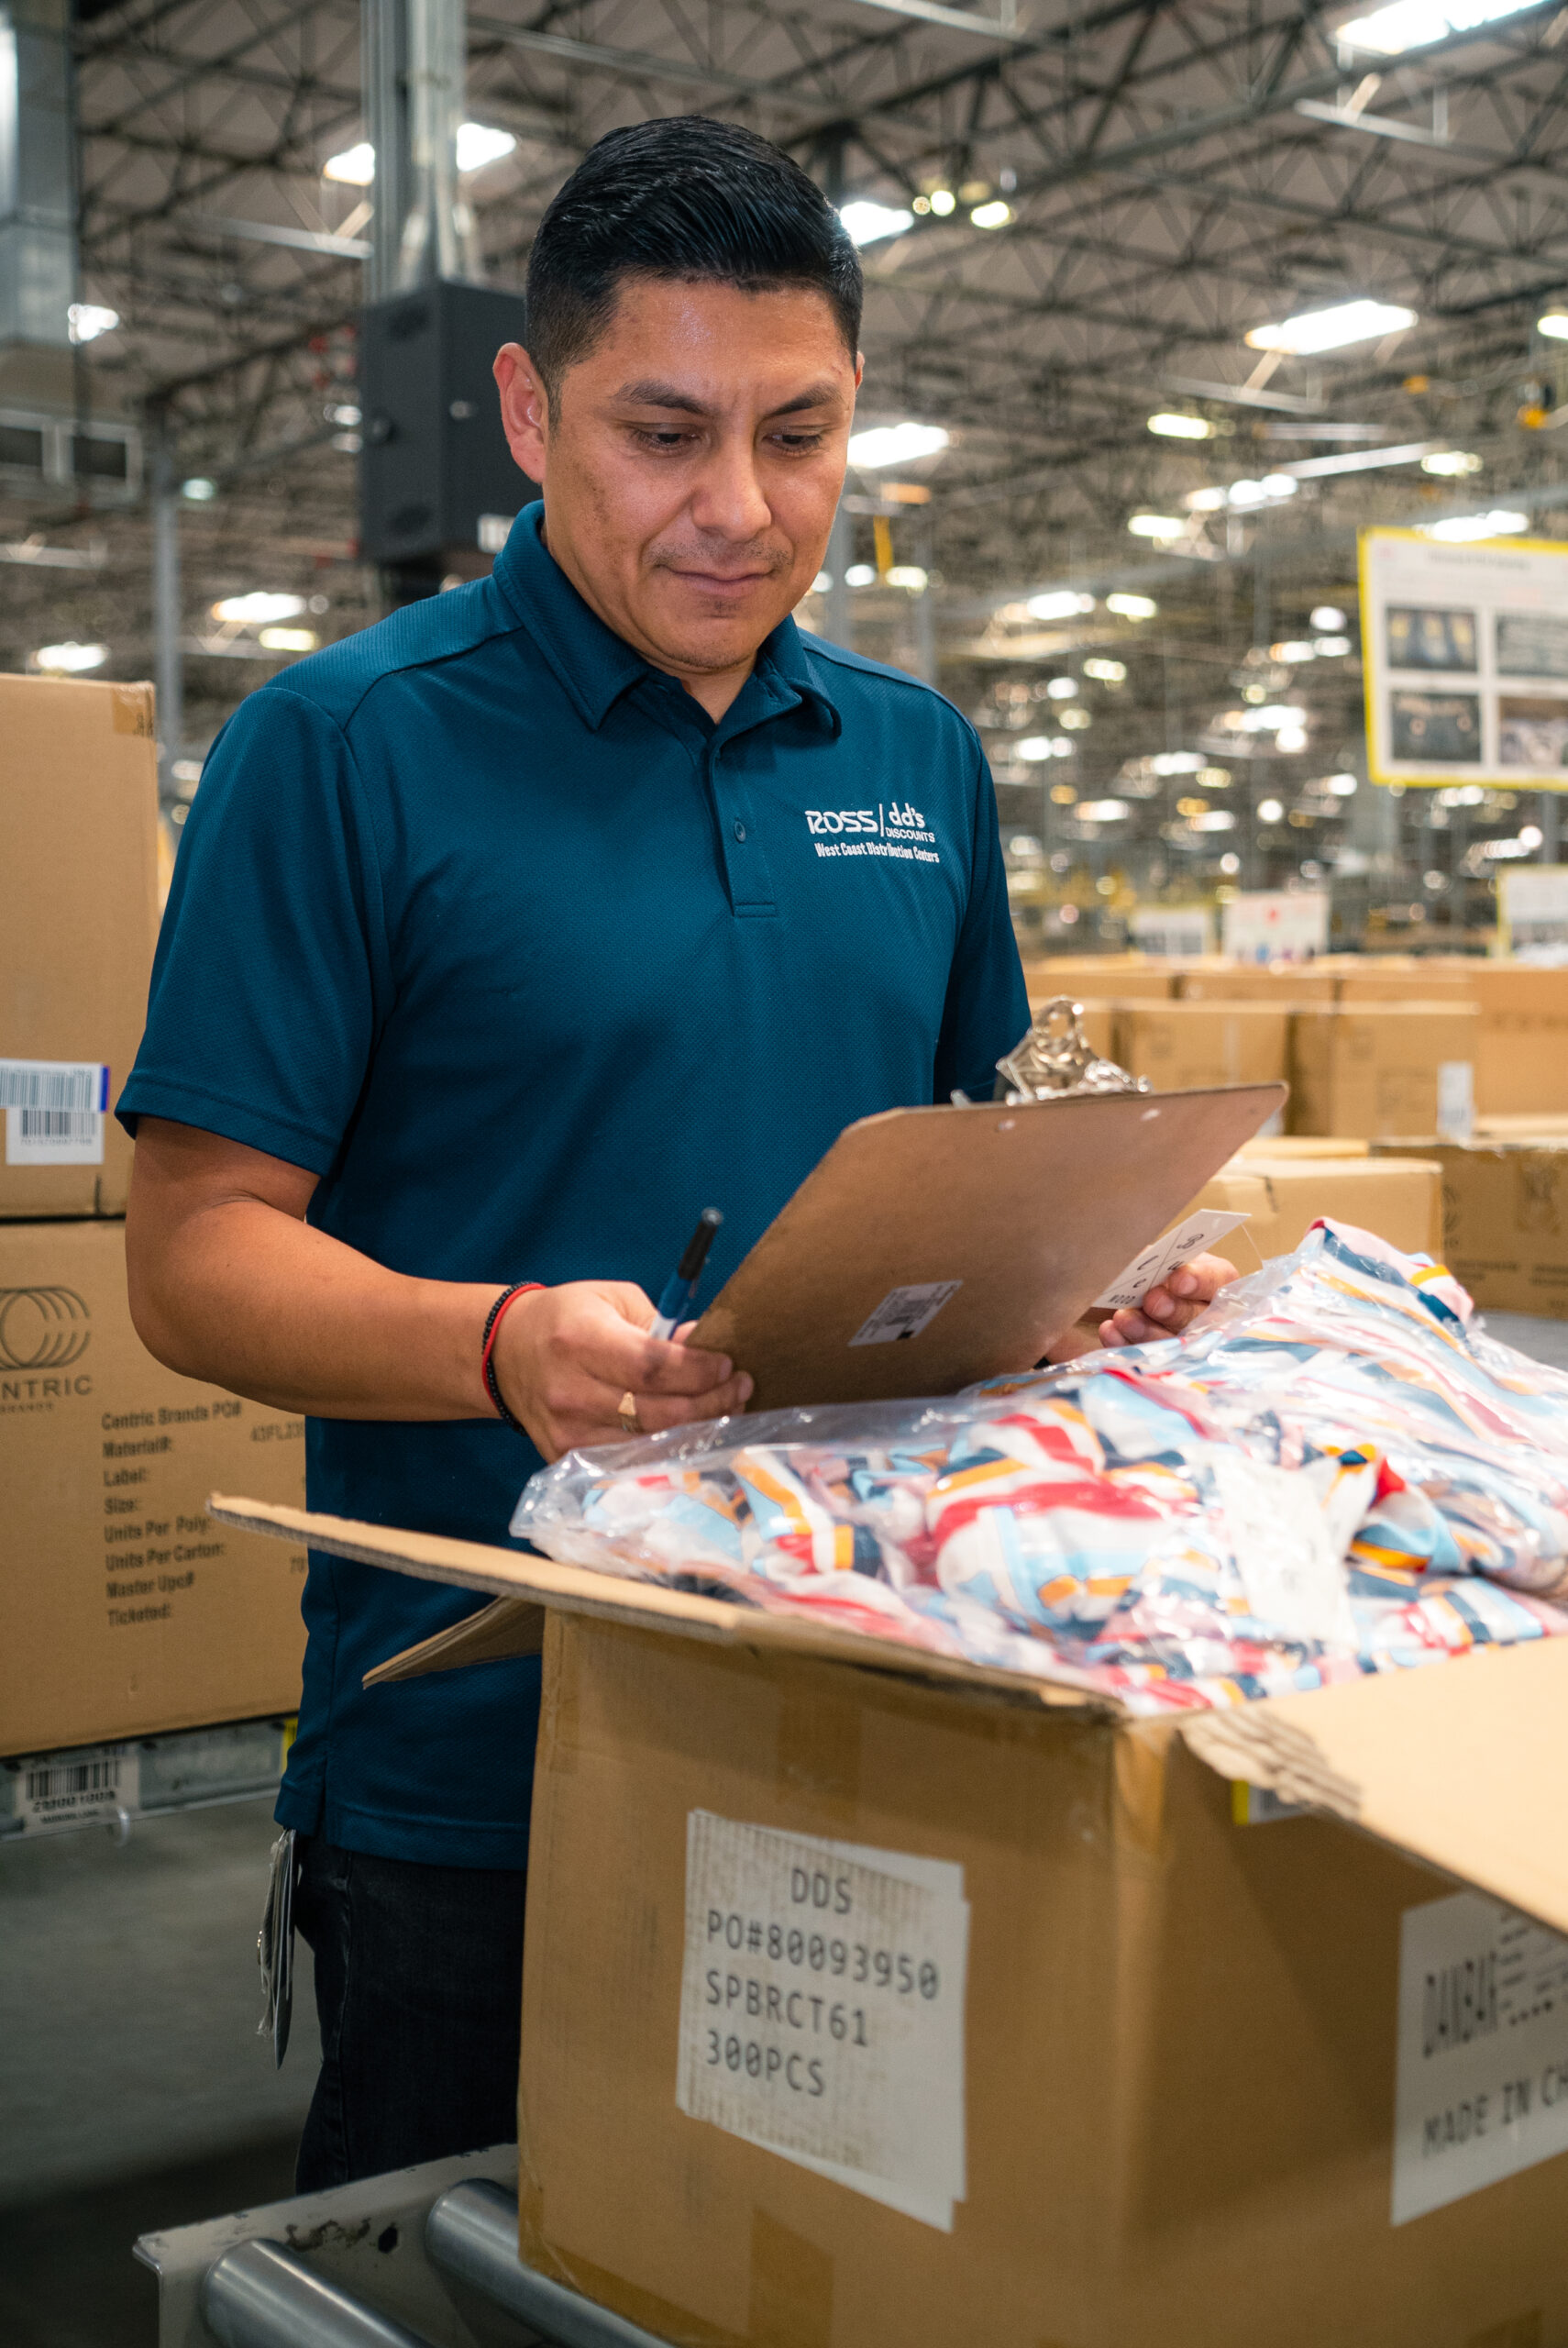 Ross Associate in a warehouse looking at a clipboard and merchandise in a box